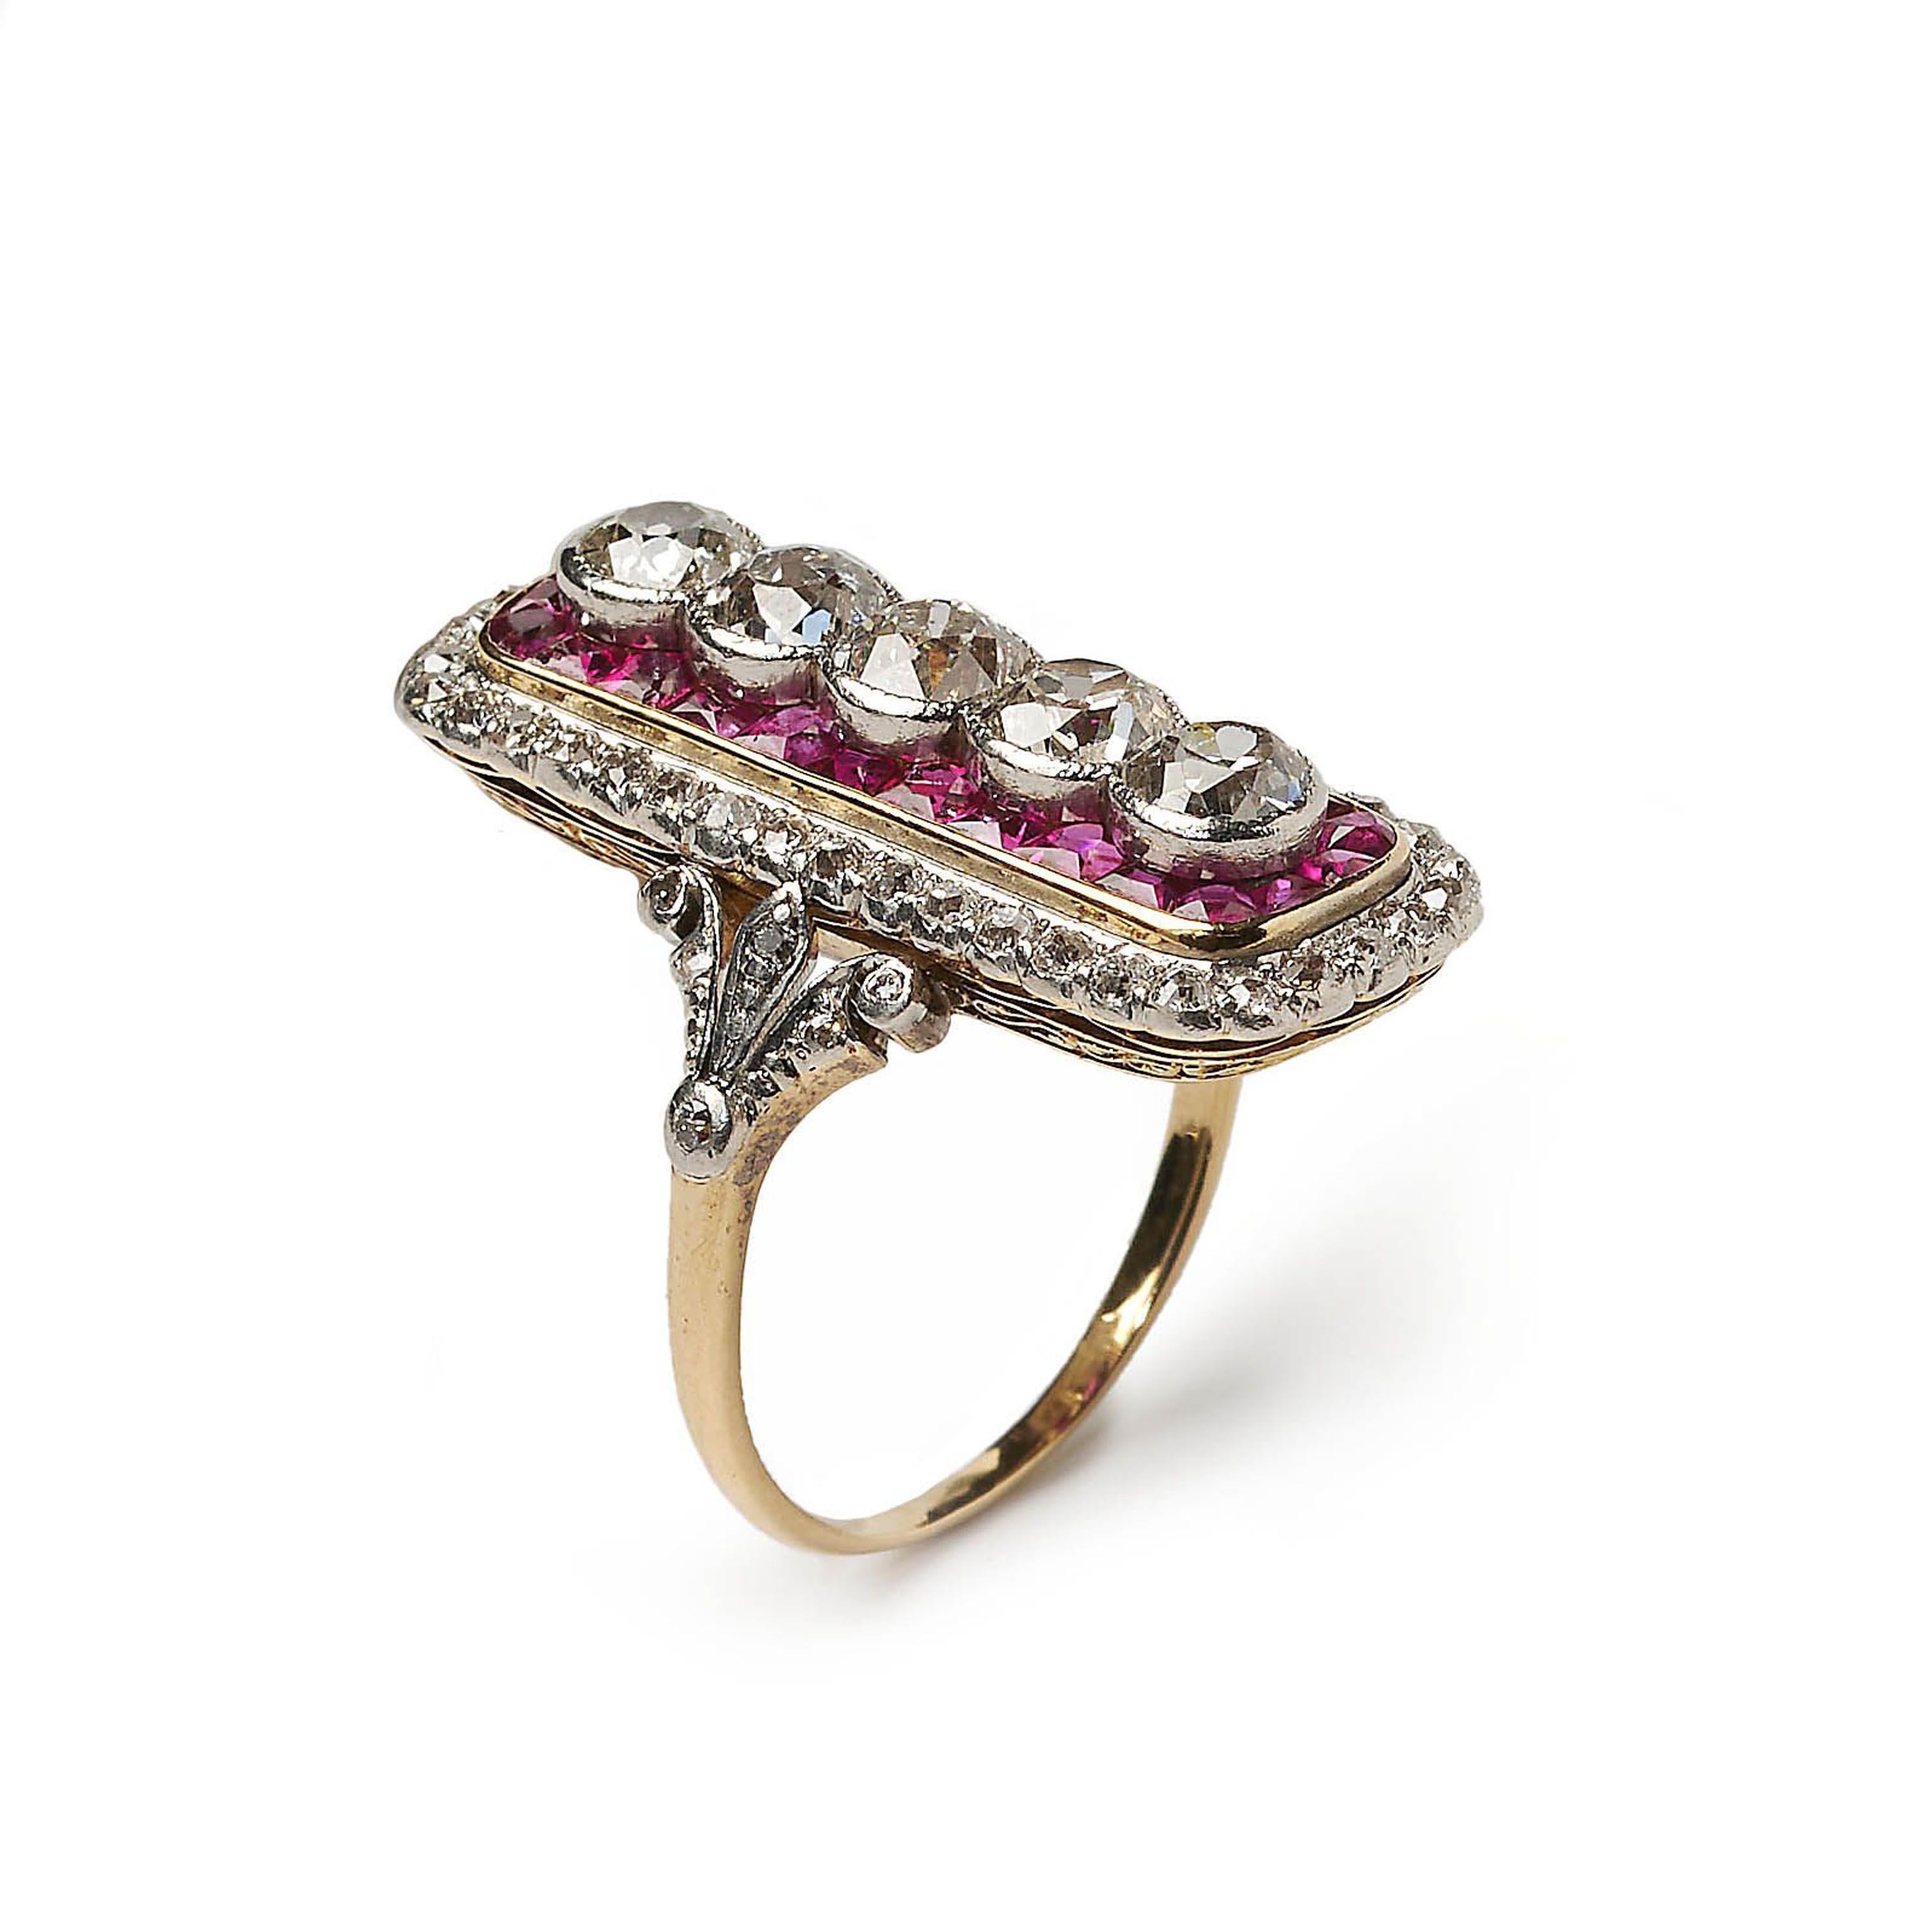 A ruby and diamond early Art Deco plaque ring, with five principle old-cut diamonds, set horizontally, in platinum rub over settings, with a surround of calibré rubies, in a rectangular, gold, rub over setting, with rounded corners, with a border of